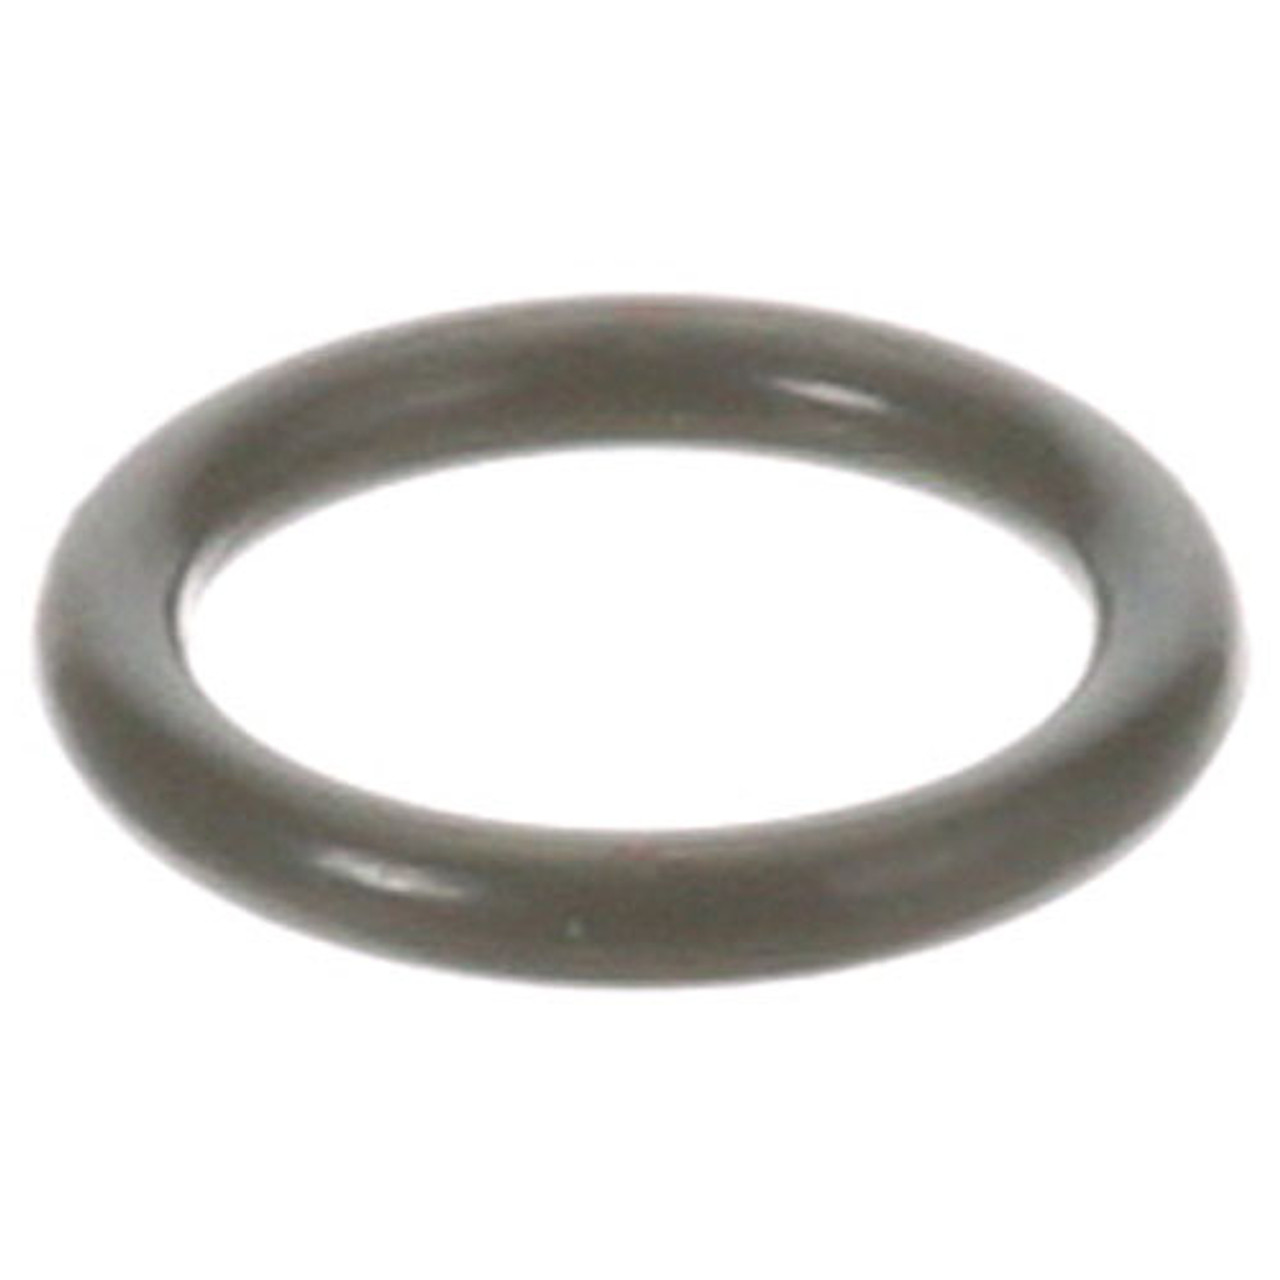 O-Ring 3/8" Id X 1/16" Width - Replacement Part For Hobart 00-067500-00044